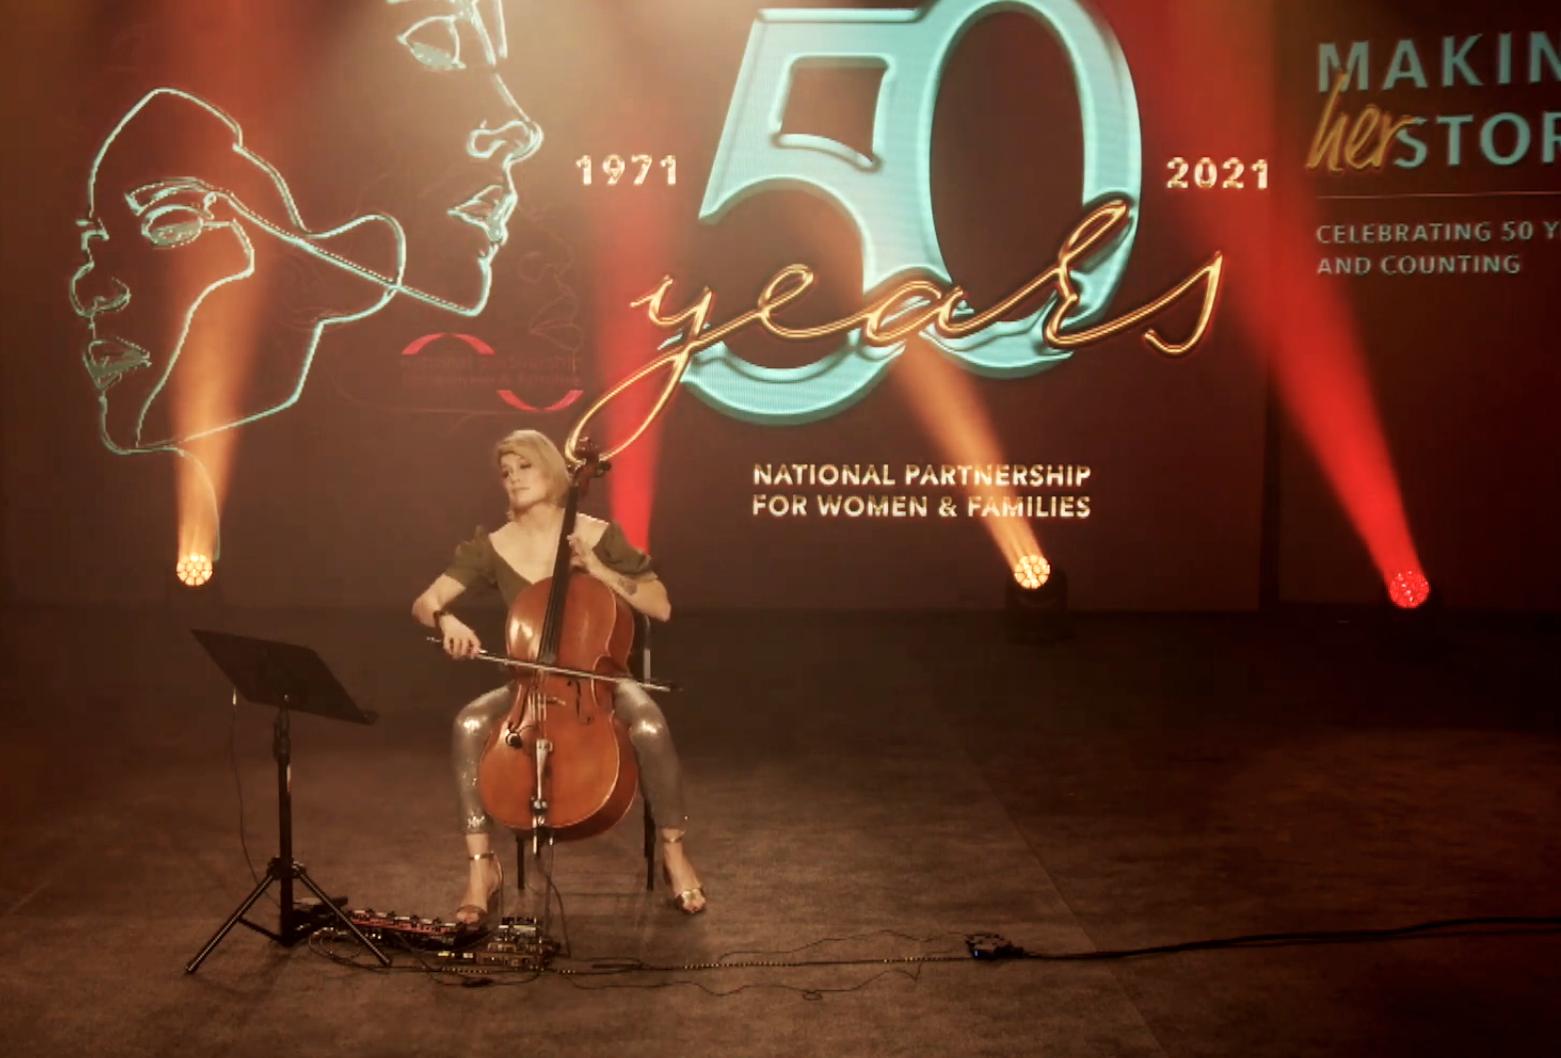 Cellist Jenn Cornell performing using her cello at the 2021 Annual Gala